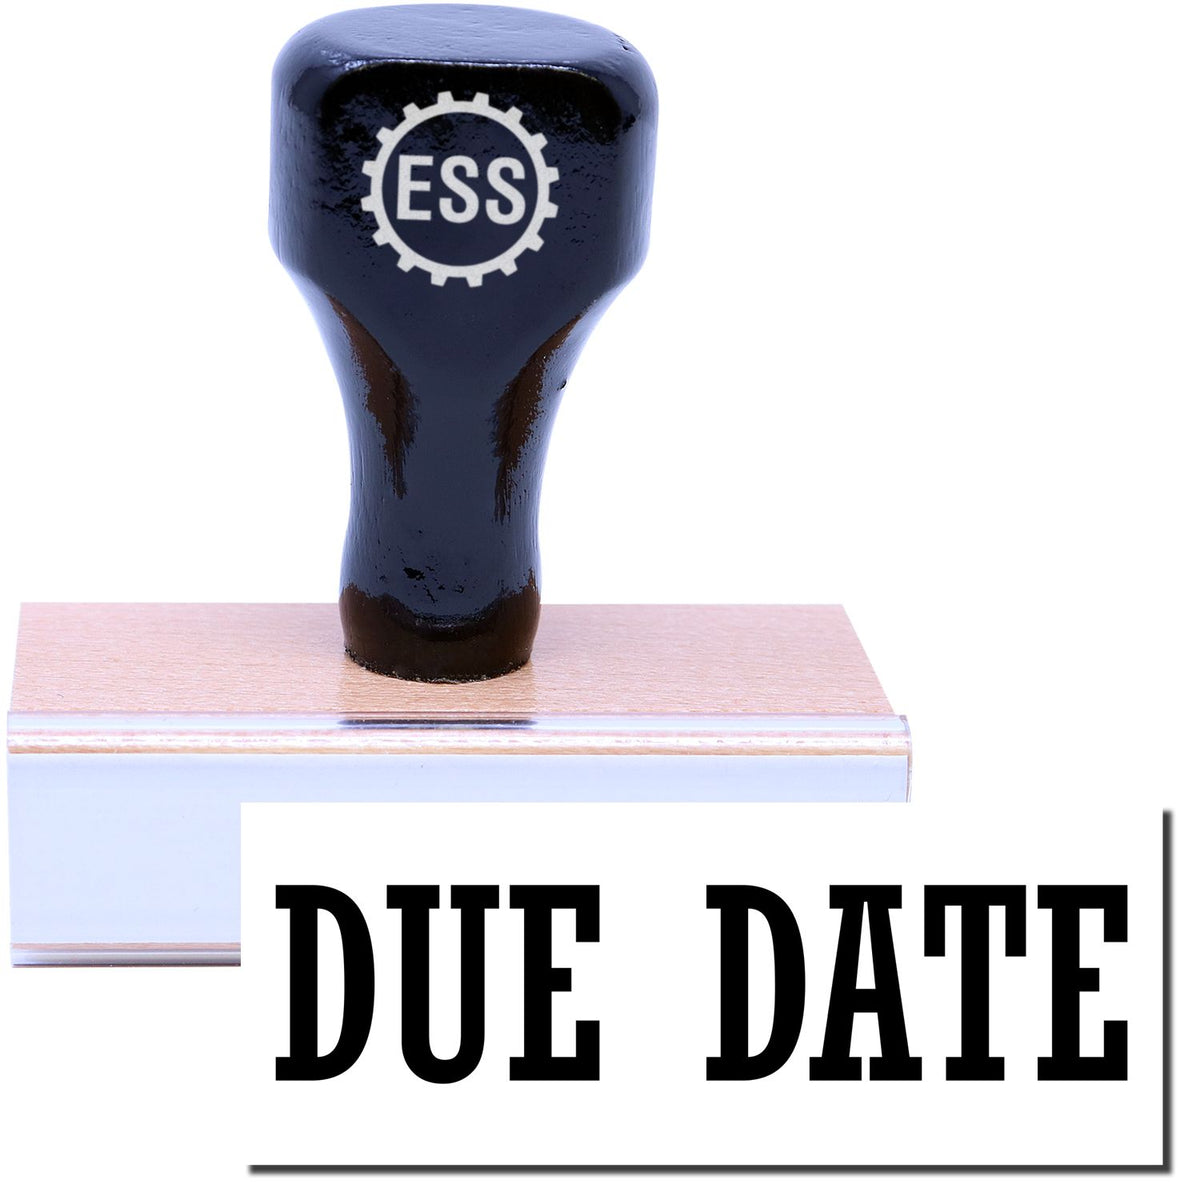 A stock office rubber stamp with a stamped image showing how the text &quot;DUE DATE&quot; is displayed after stamping.